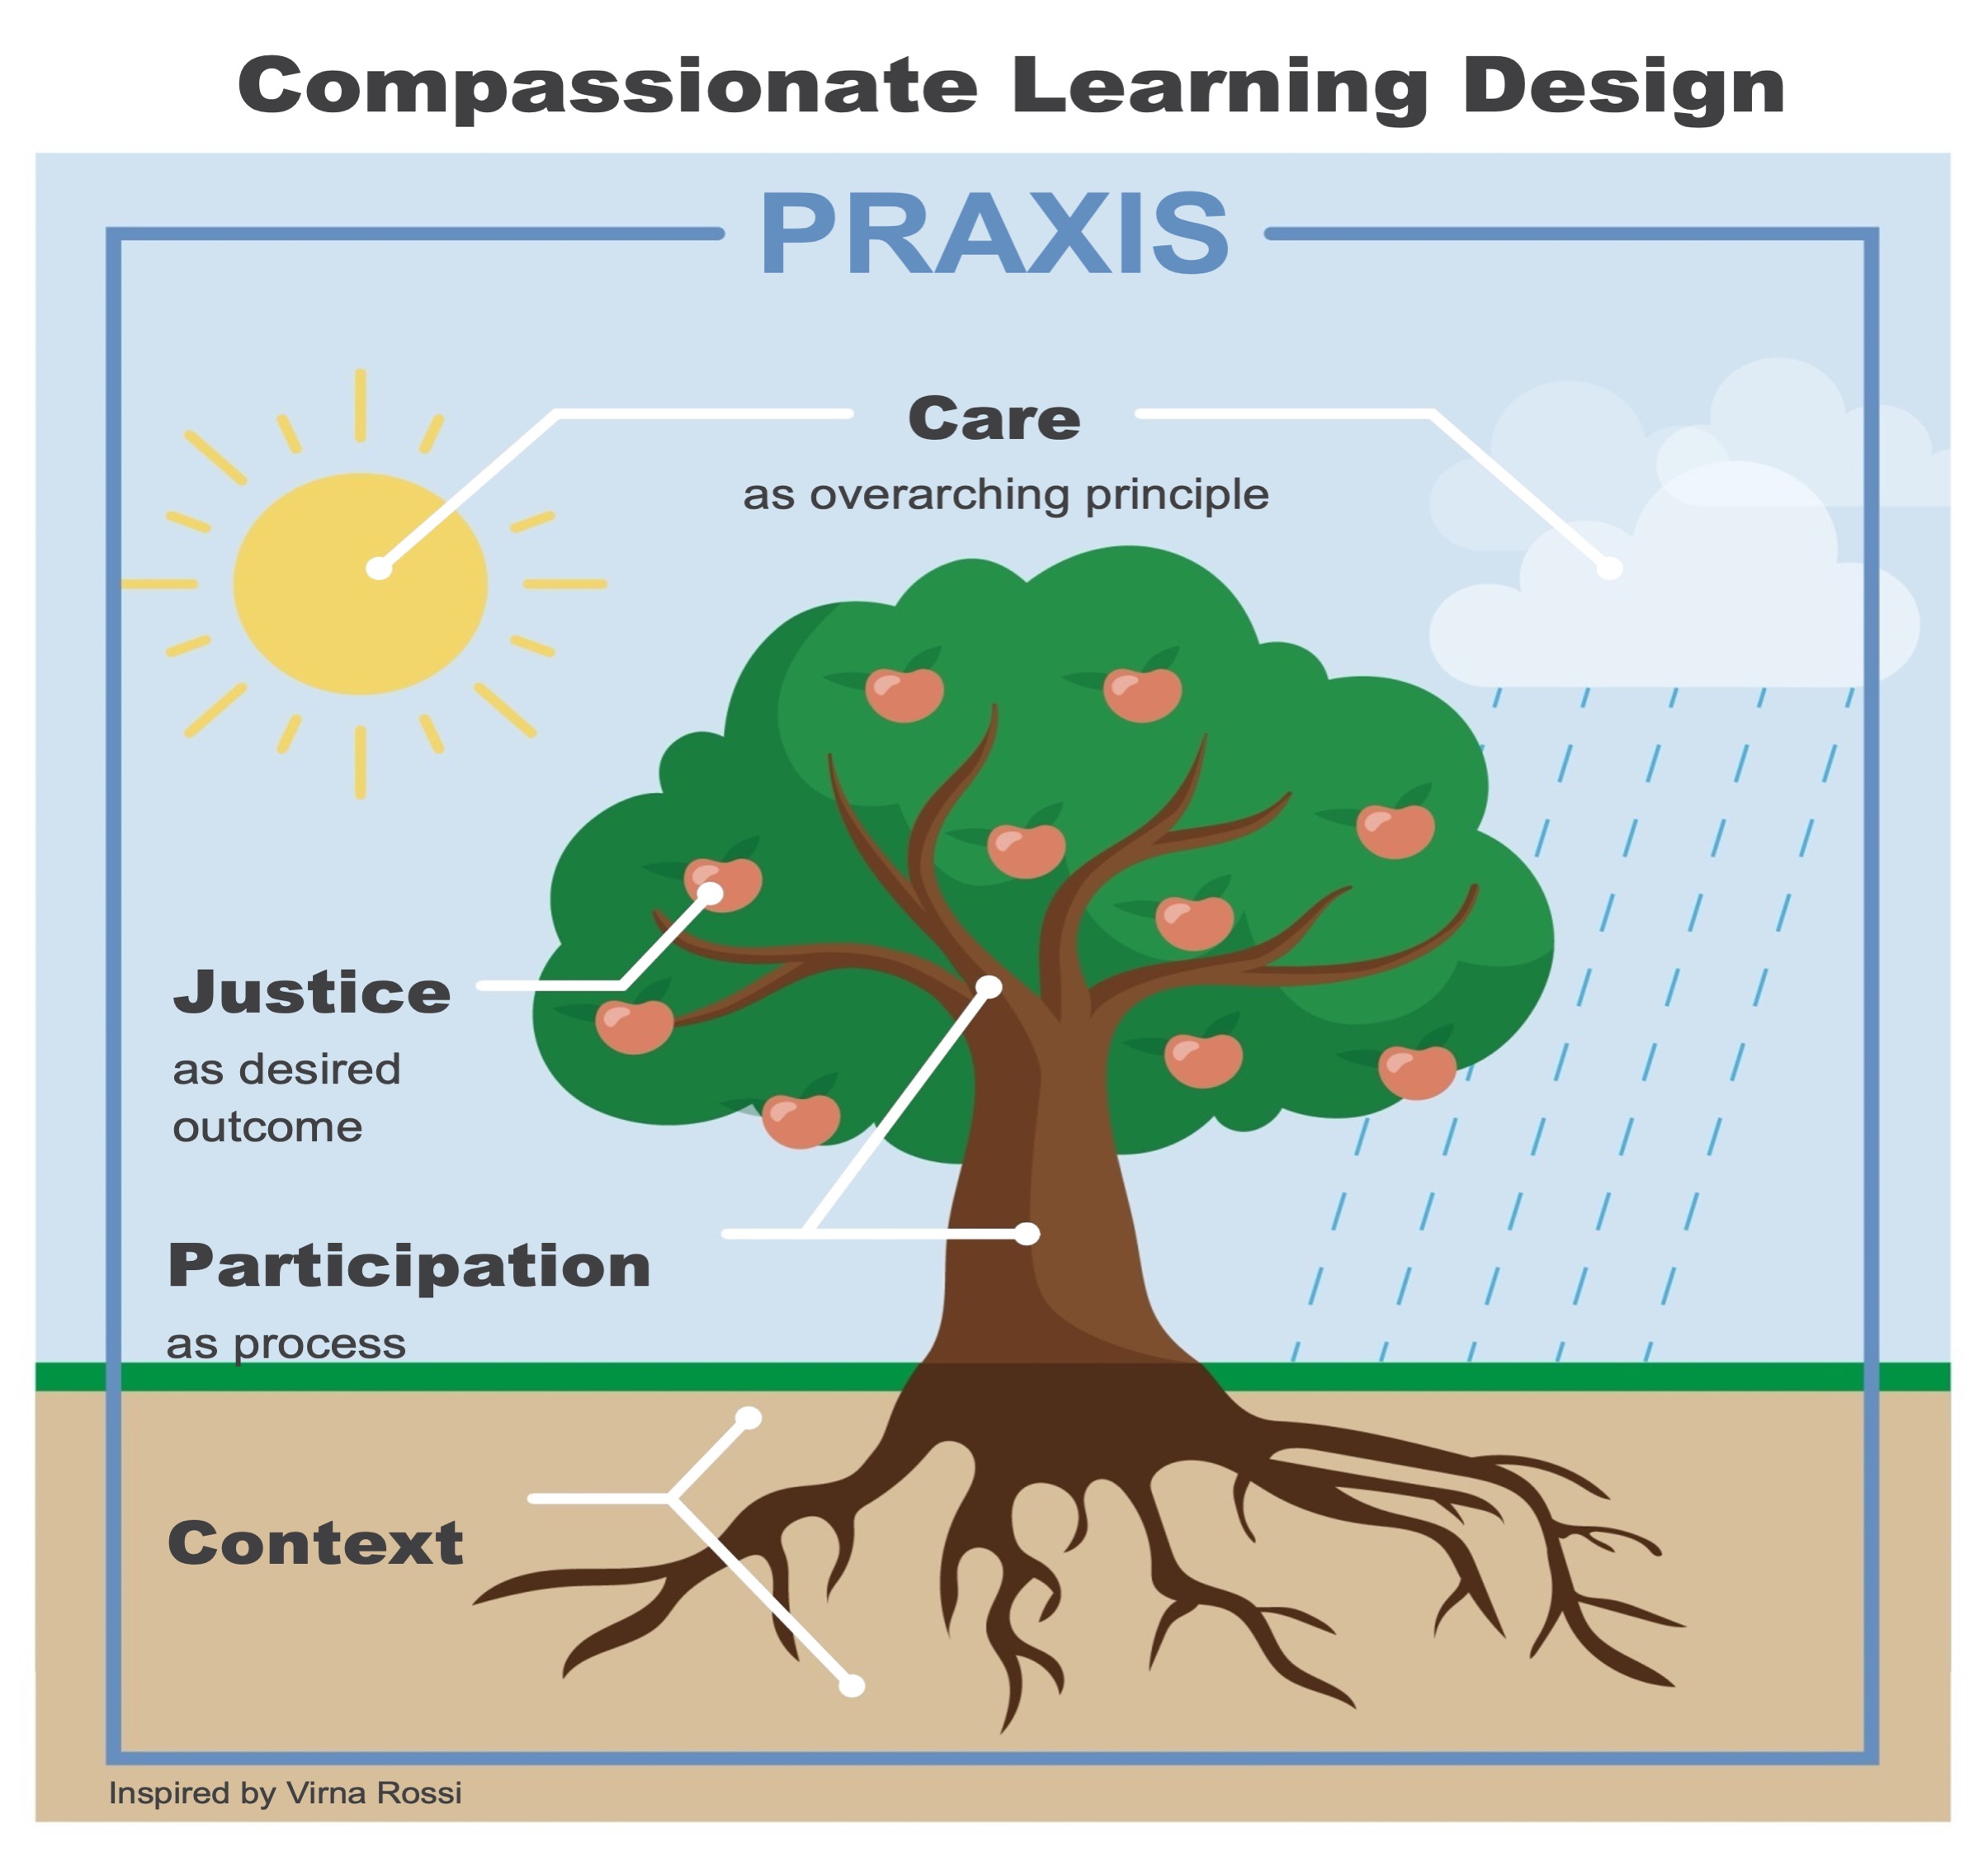 Image of a tree, with trunk representing “participation as process”, the sun and rain “care as overarching principle” and fruits as “justice as desired outcome” resulting in “praxis”